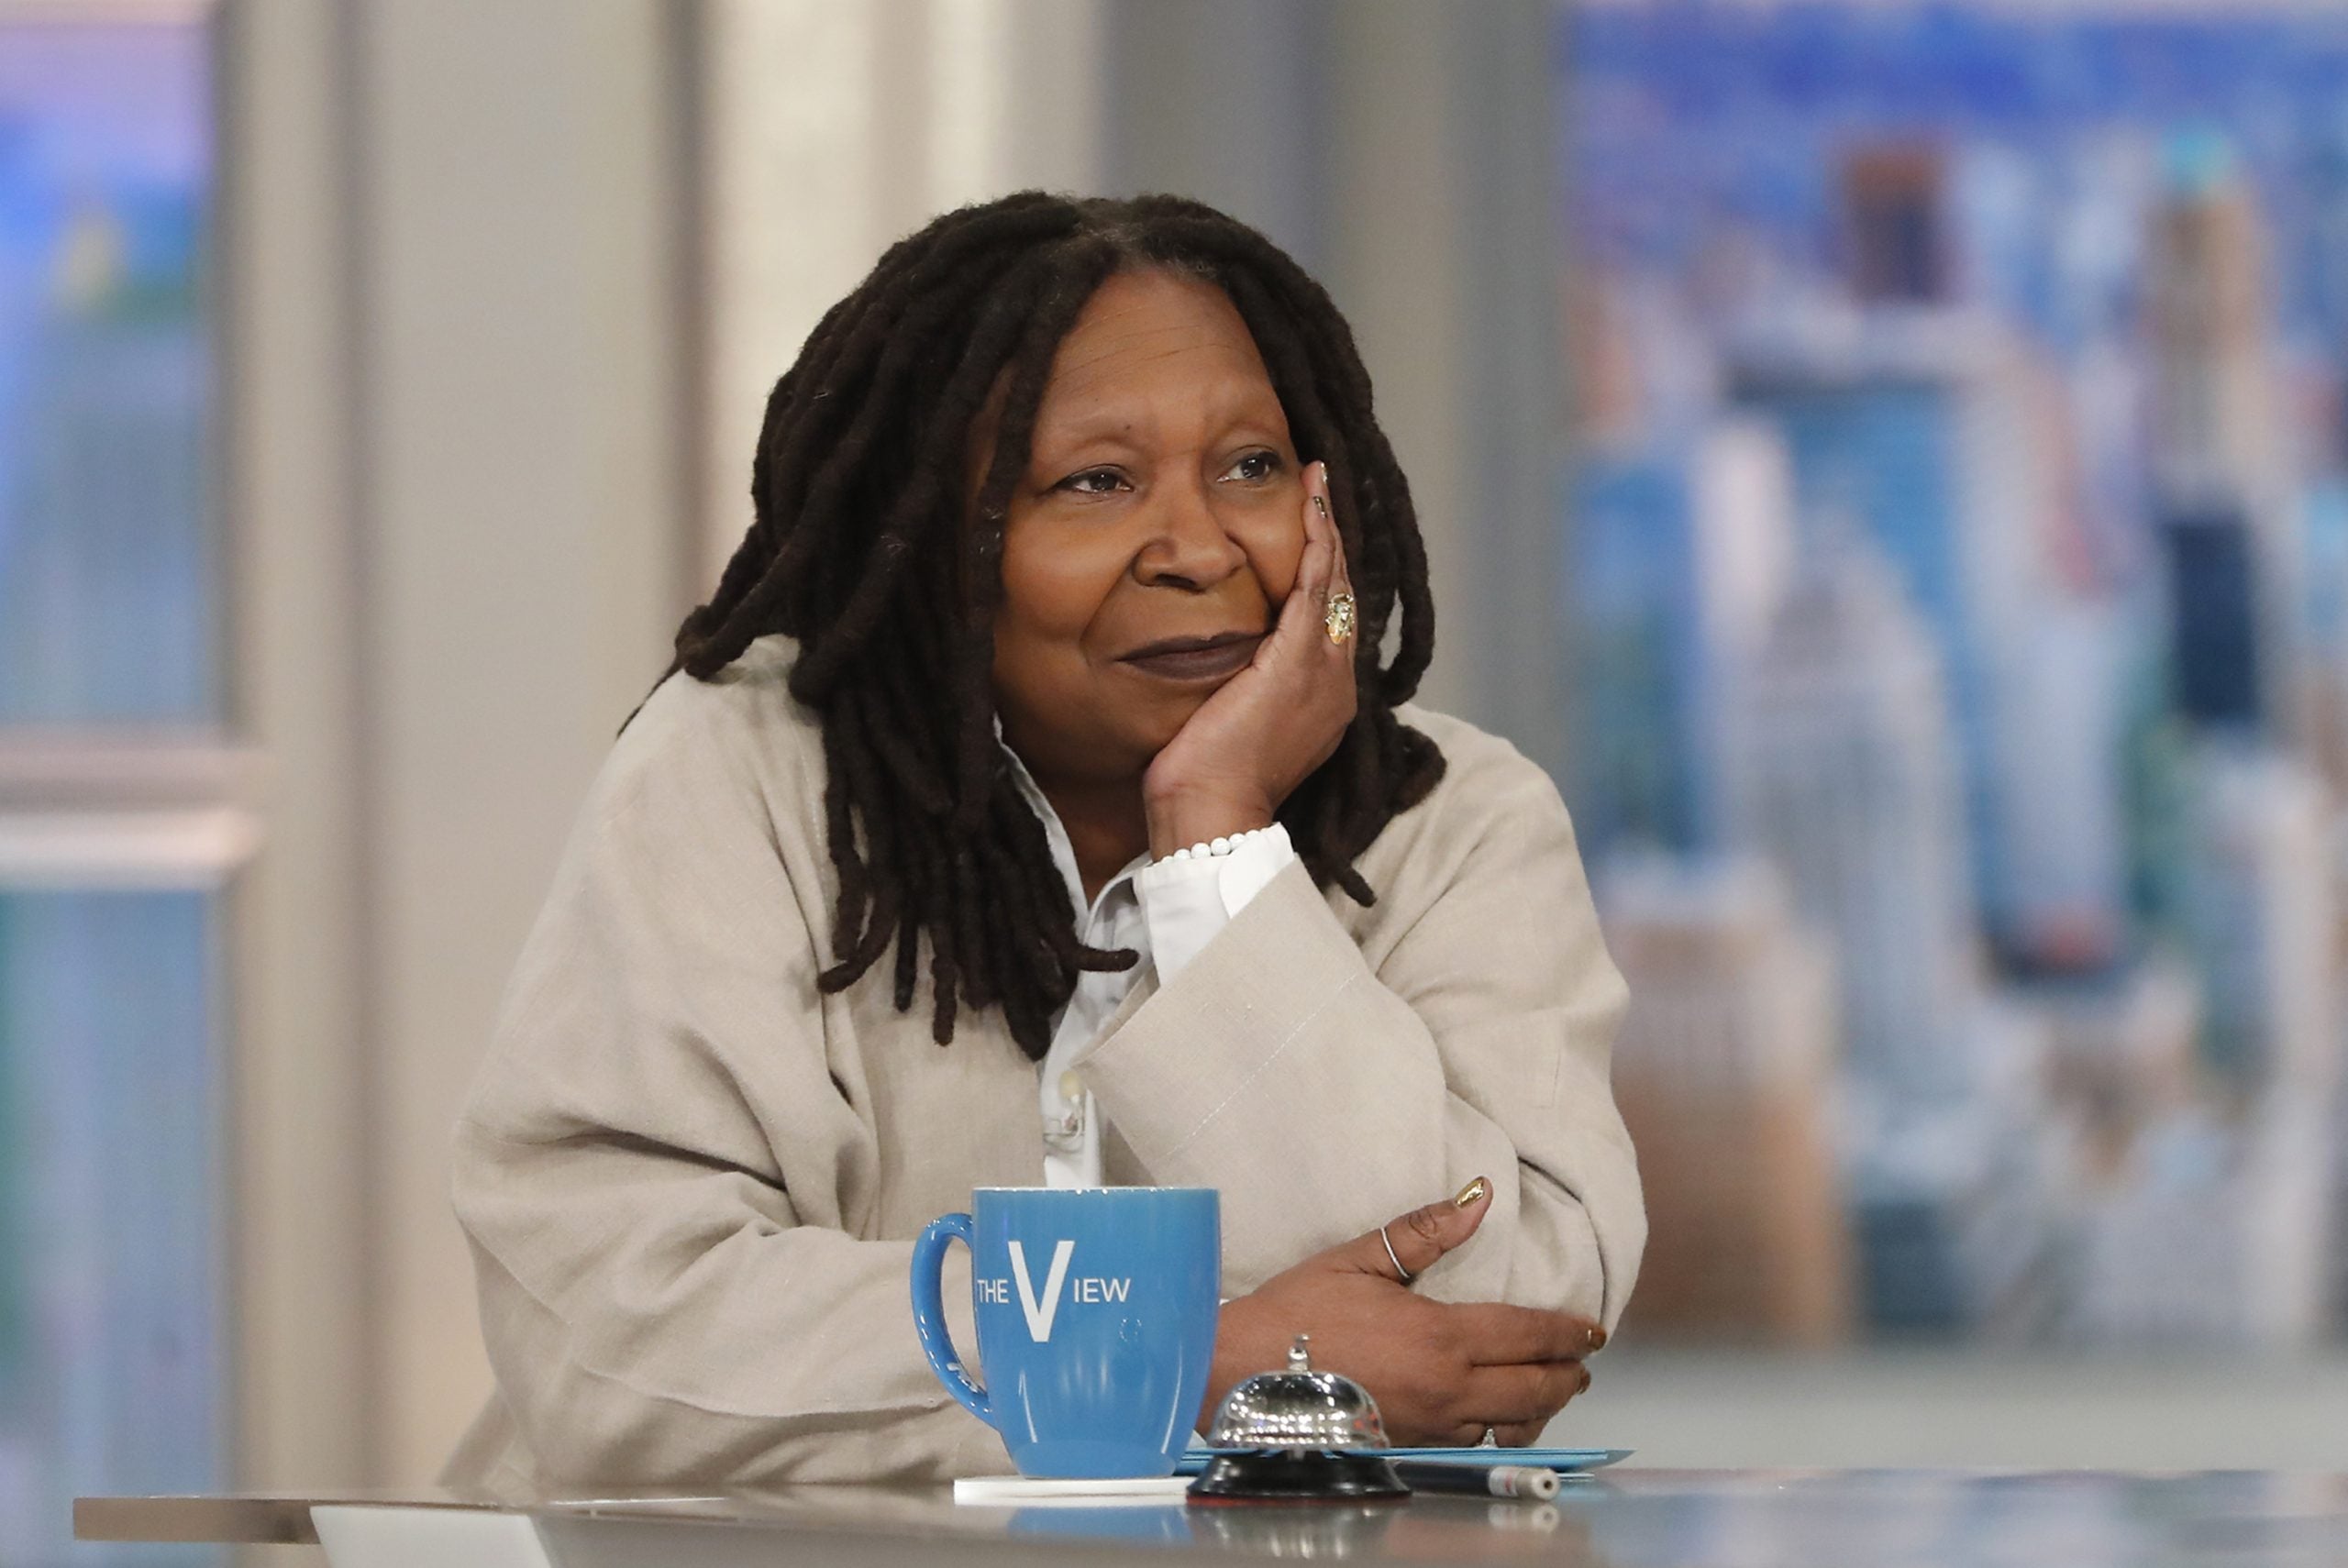 ICYMI: Whoopi Goldberg Absent From Premiere Of ‘The View’ Due To COVID 